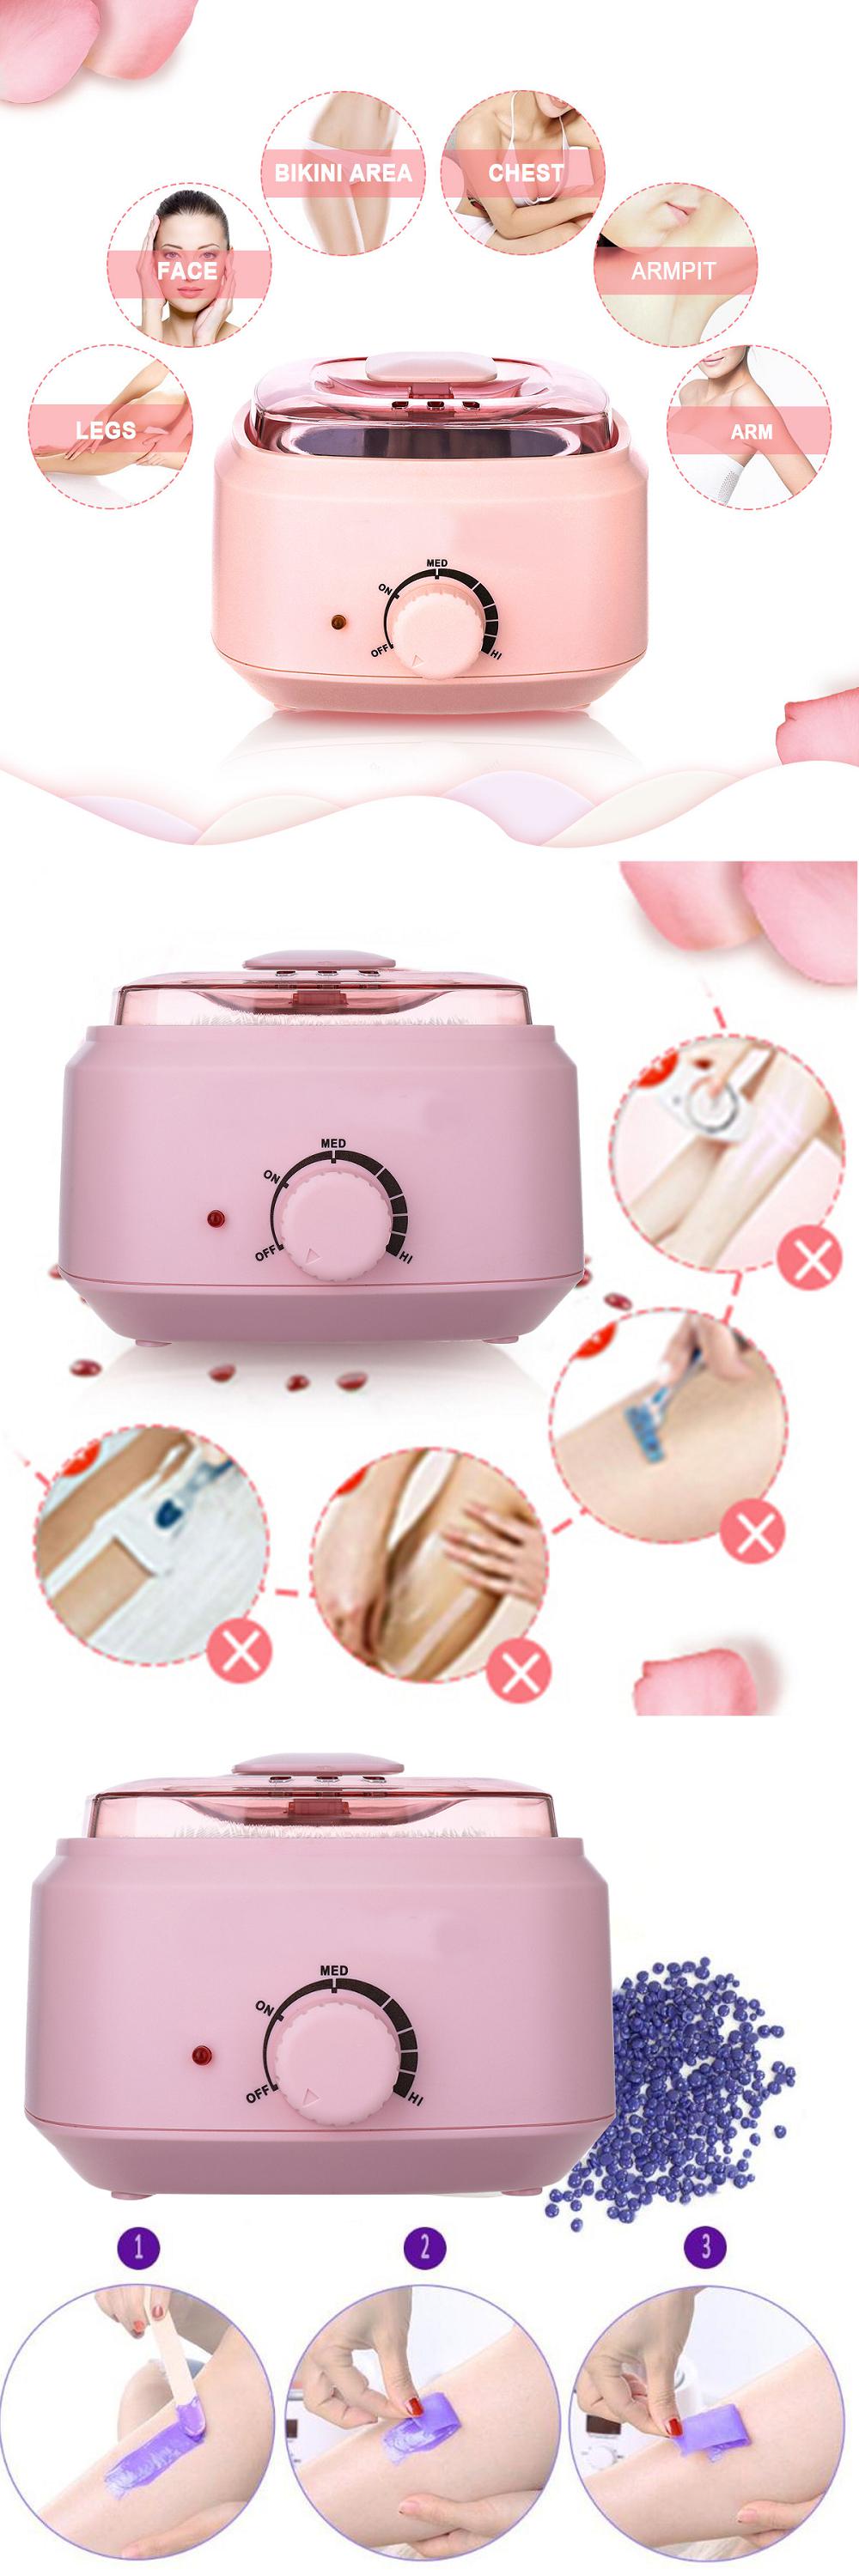 YFM-500cc-100W-Wax-Heater-Machine-for-Face-Body-See-through-Vented-Cover-Removable-Aluminum-Pot-360d-1898107-3